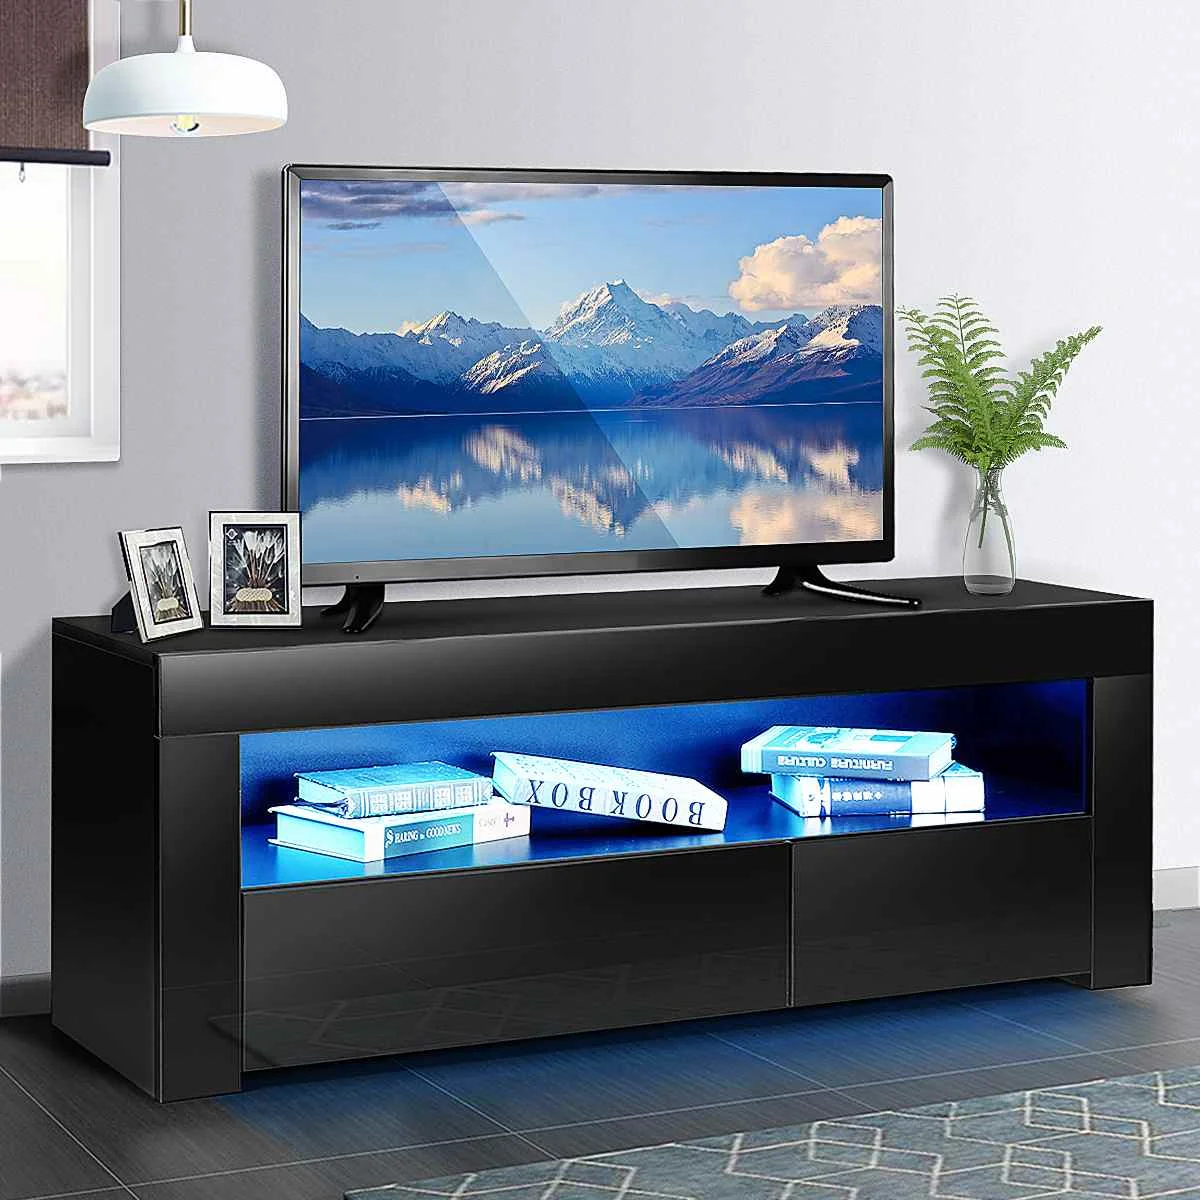 With Drawer Cabinet Storage Modern Tv Furniture For Home